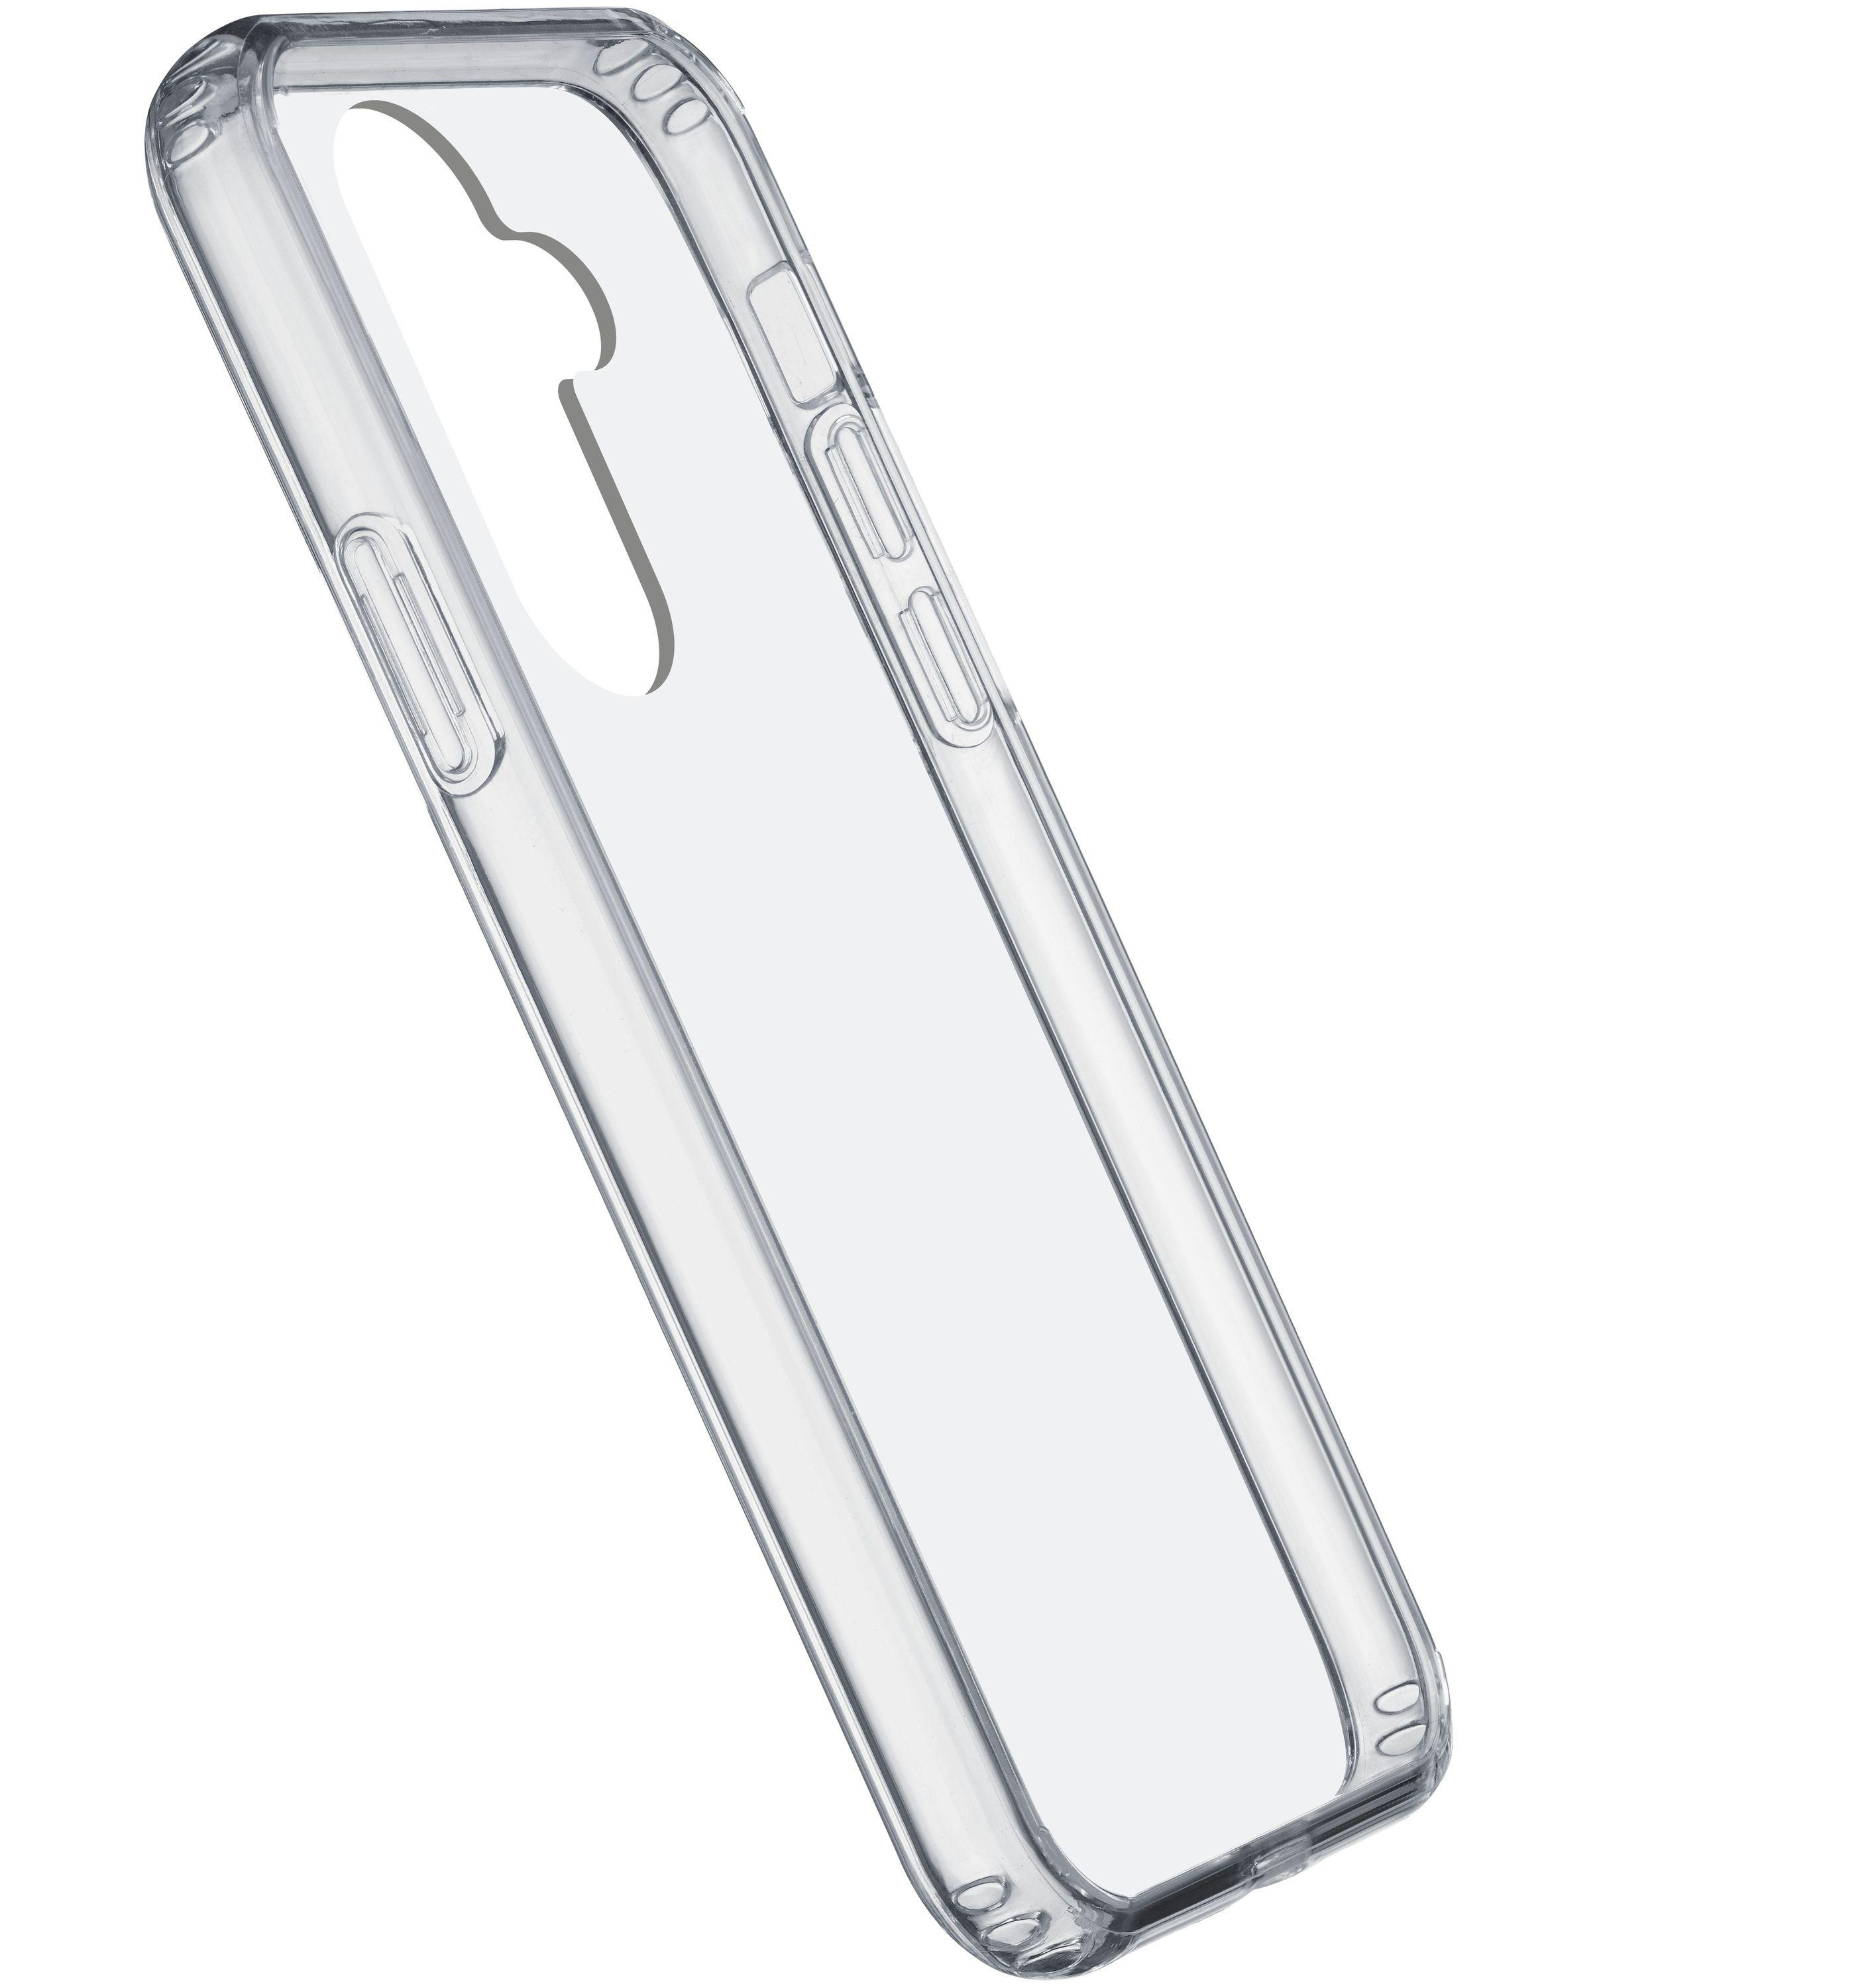 Galaxy CELLULAR Backcover, Transparent A34, CLEARDUOGALA34T, LINE Samsung,